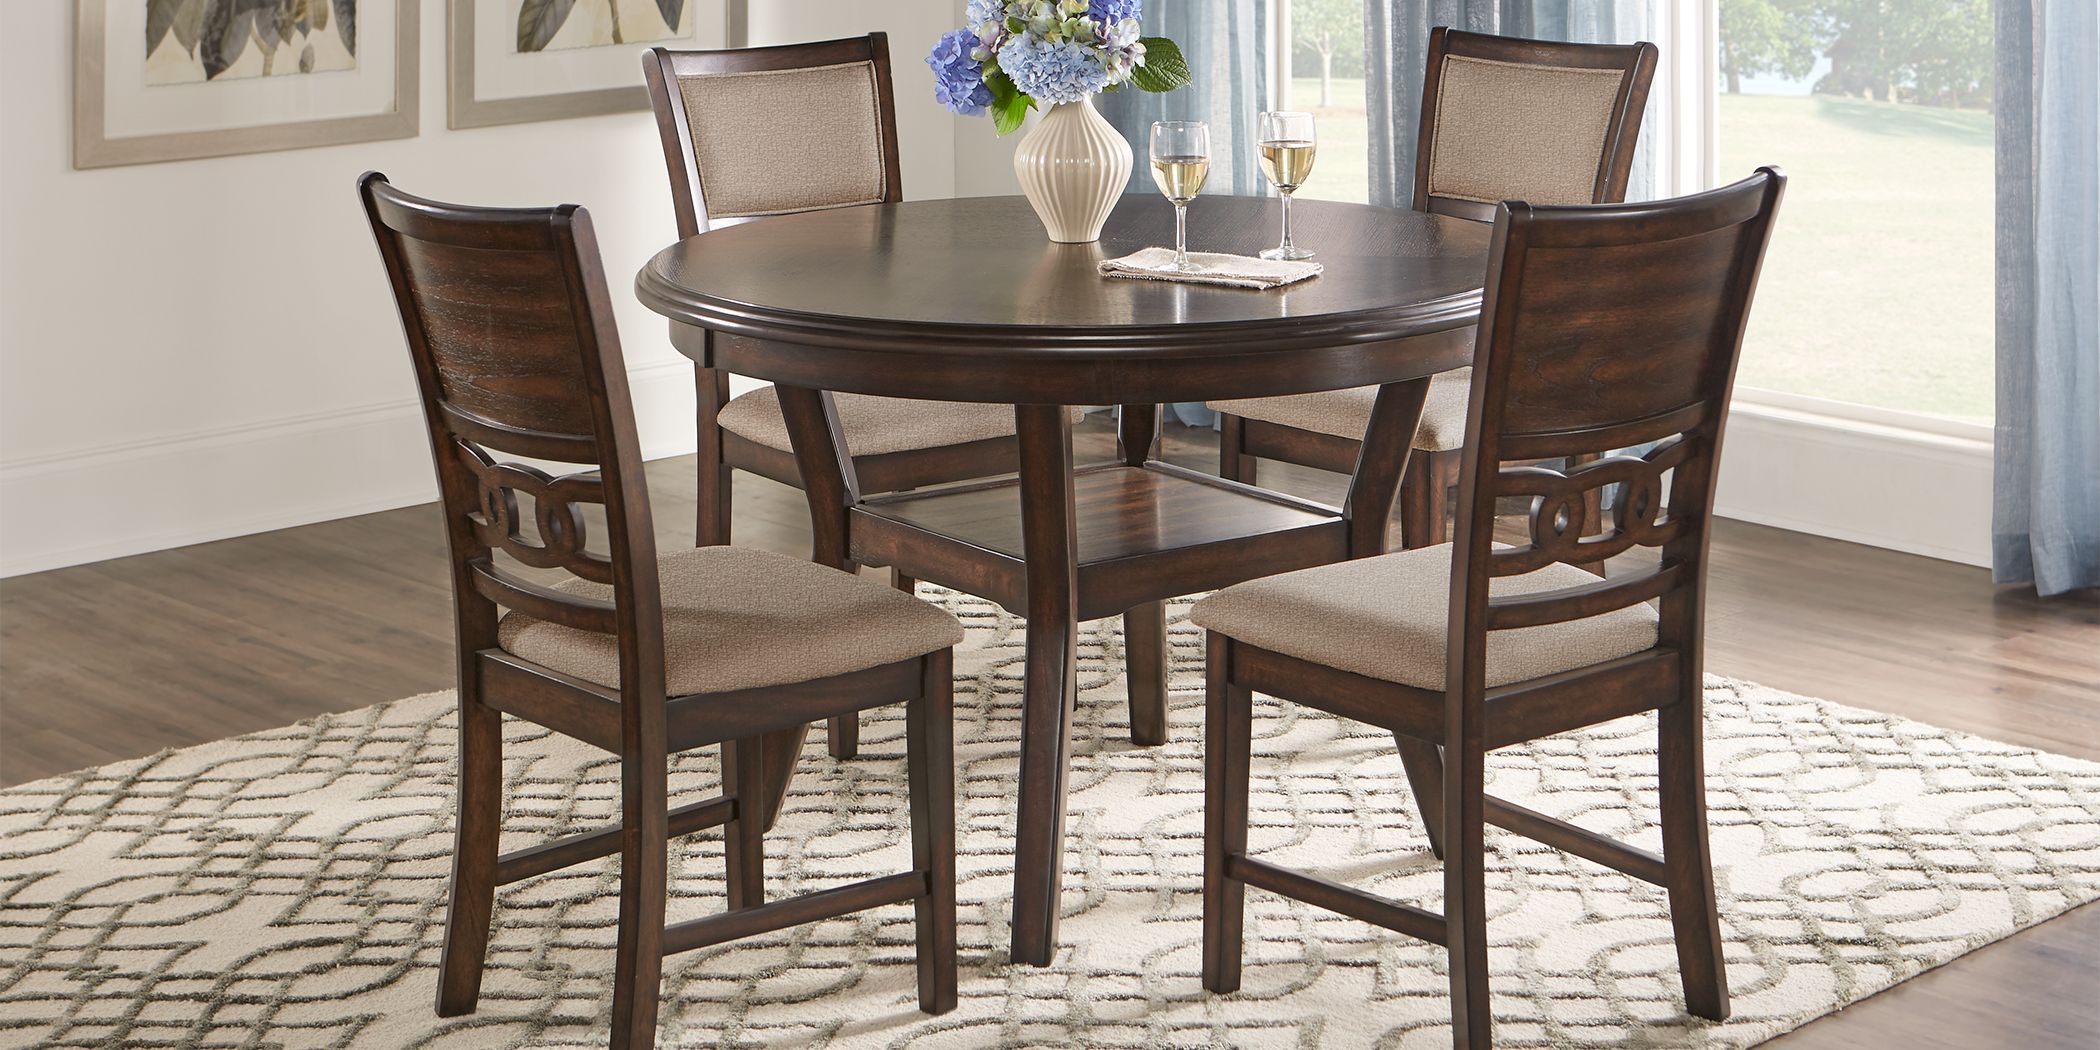 Rooms To Go Dining Room Furniture, Rooms To Go Formal Dining Room Set